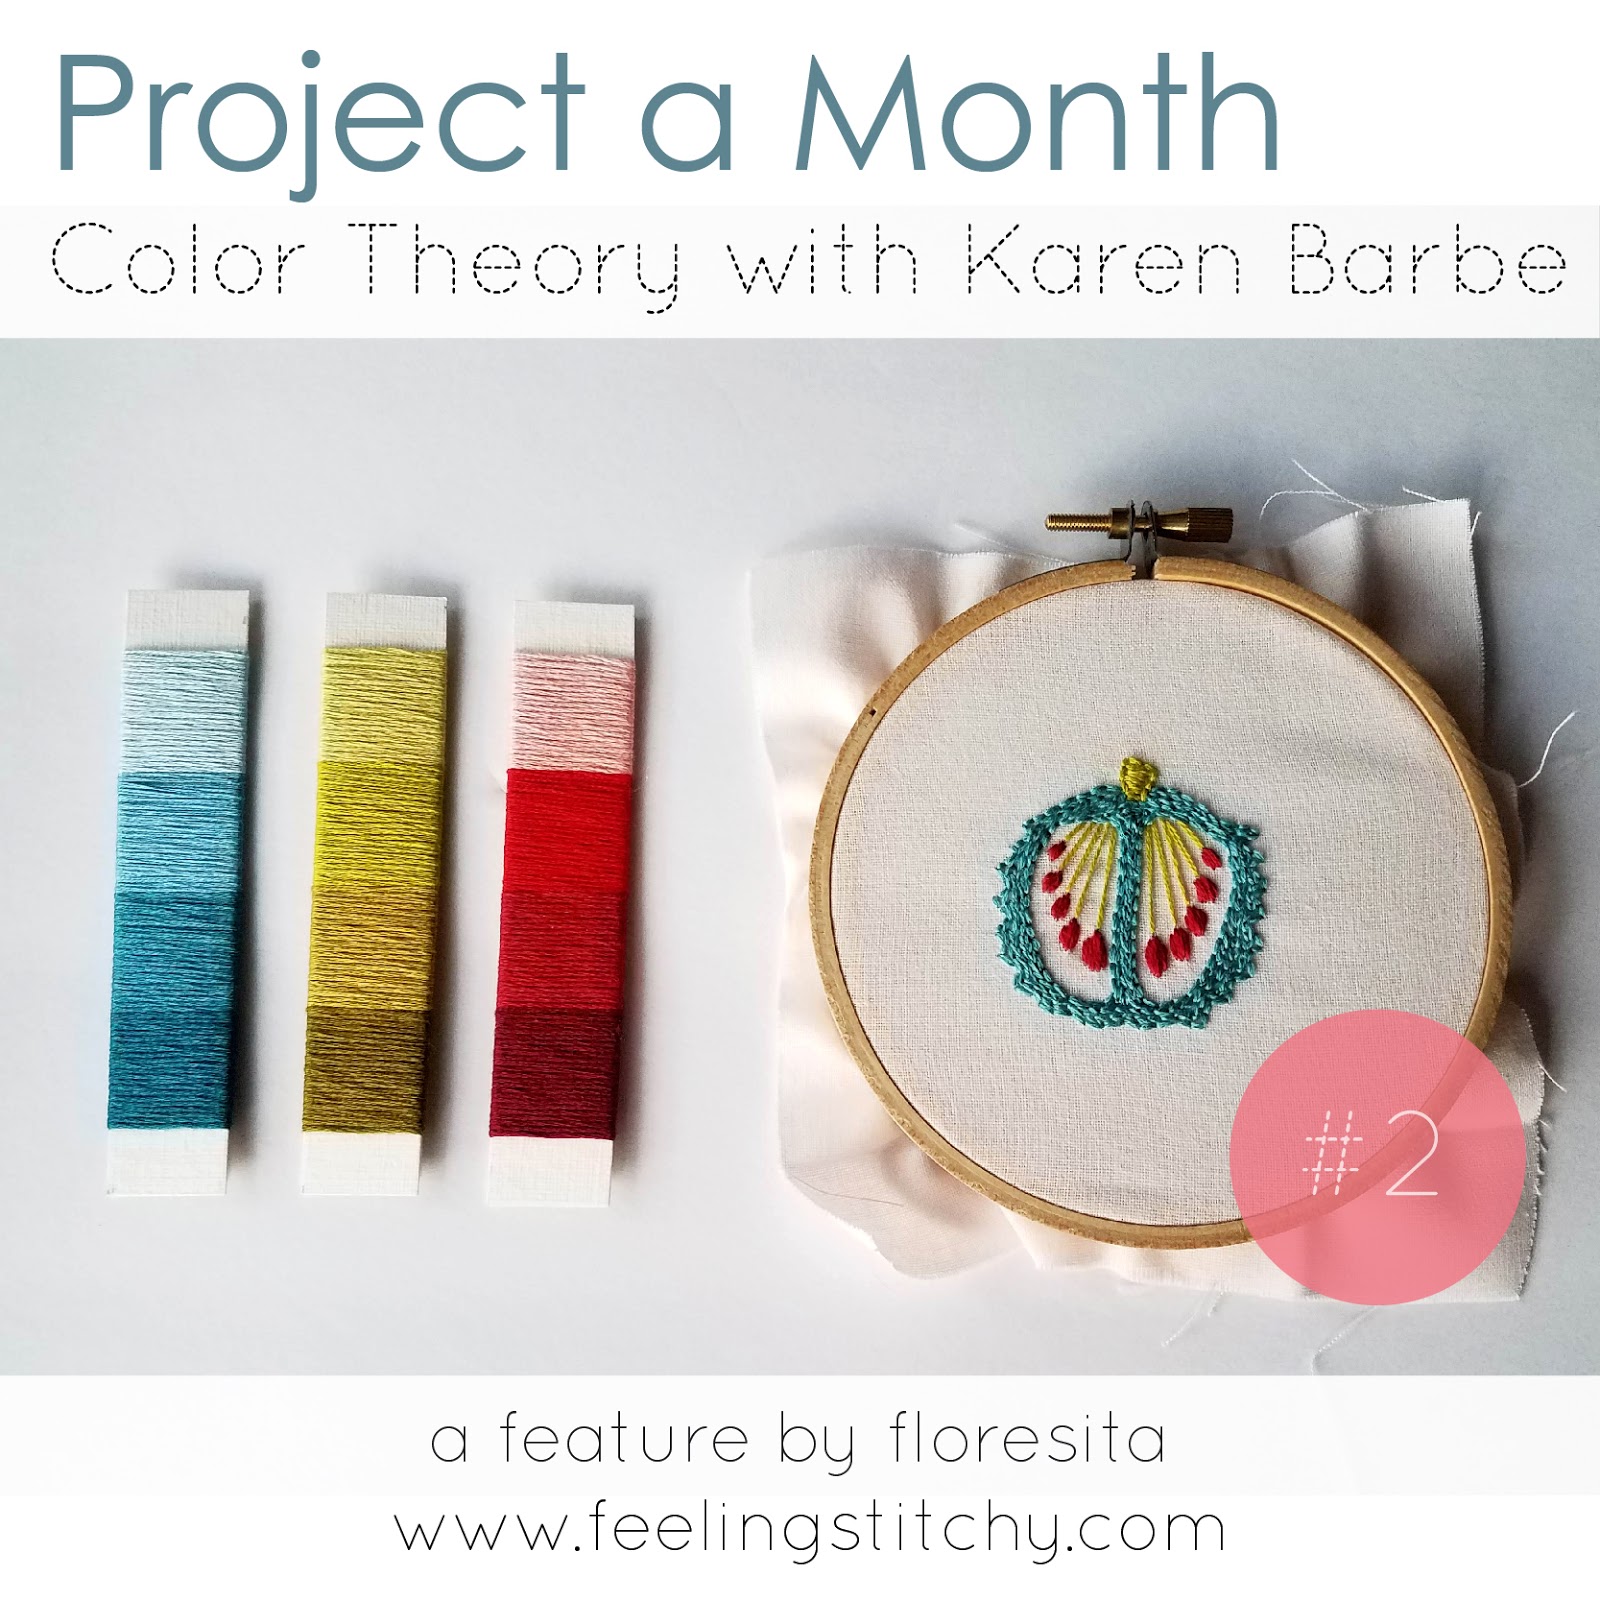 Project a Month 2 - Color Theory Class with Karen Barbe on Domestika as featured by floresita on Feeling Stitchy